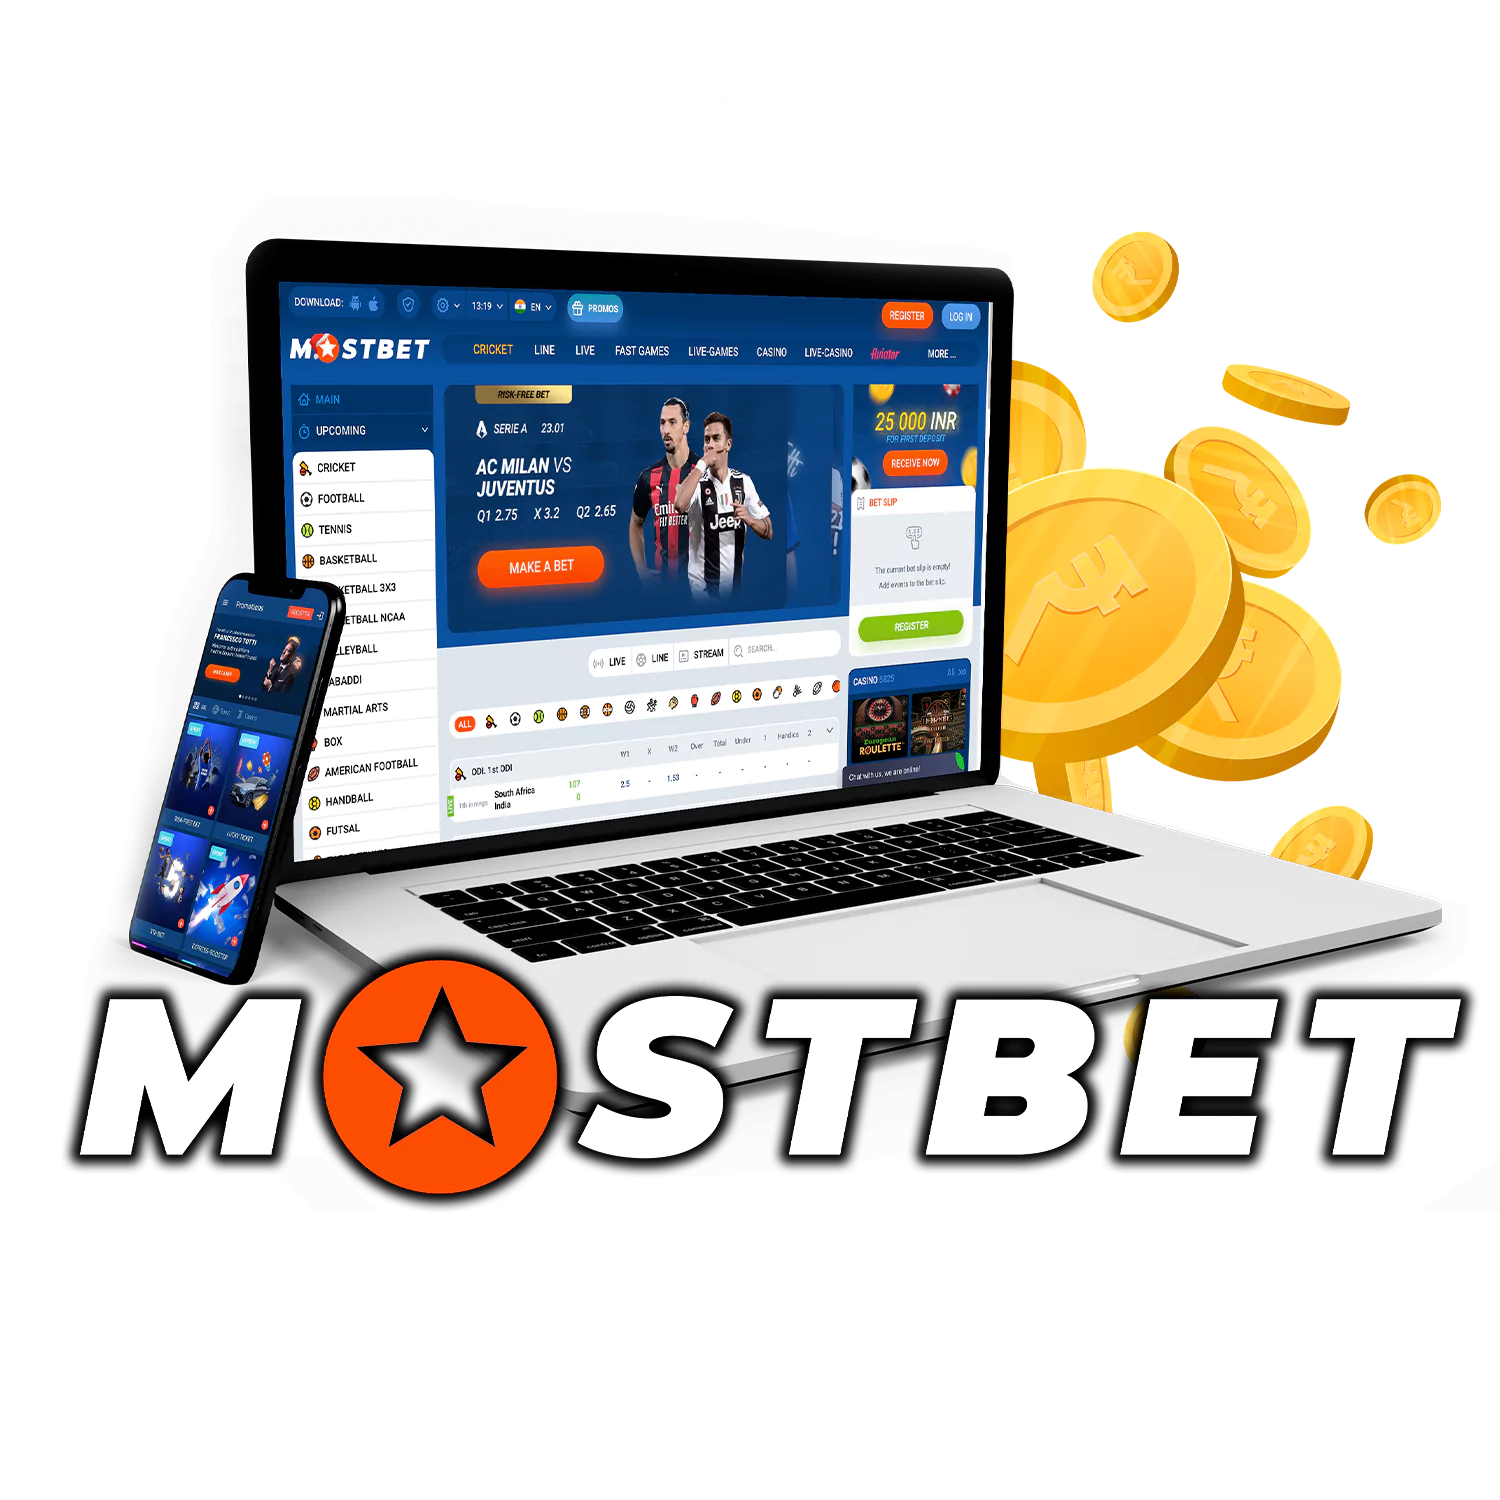 Master Your Mostbet – Strategies for Winning in 5 Minutes A Day